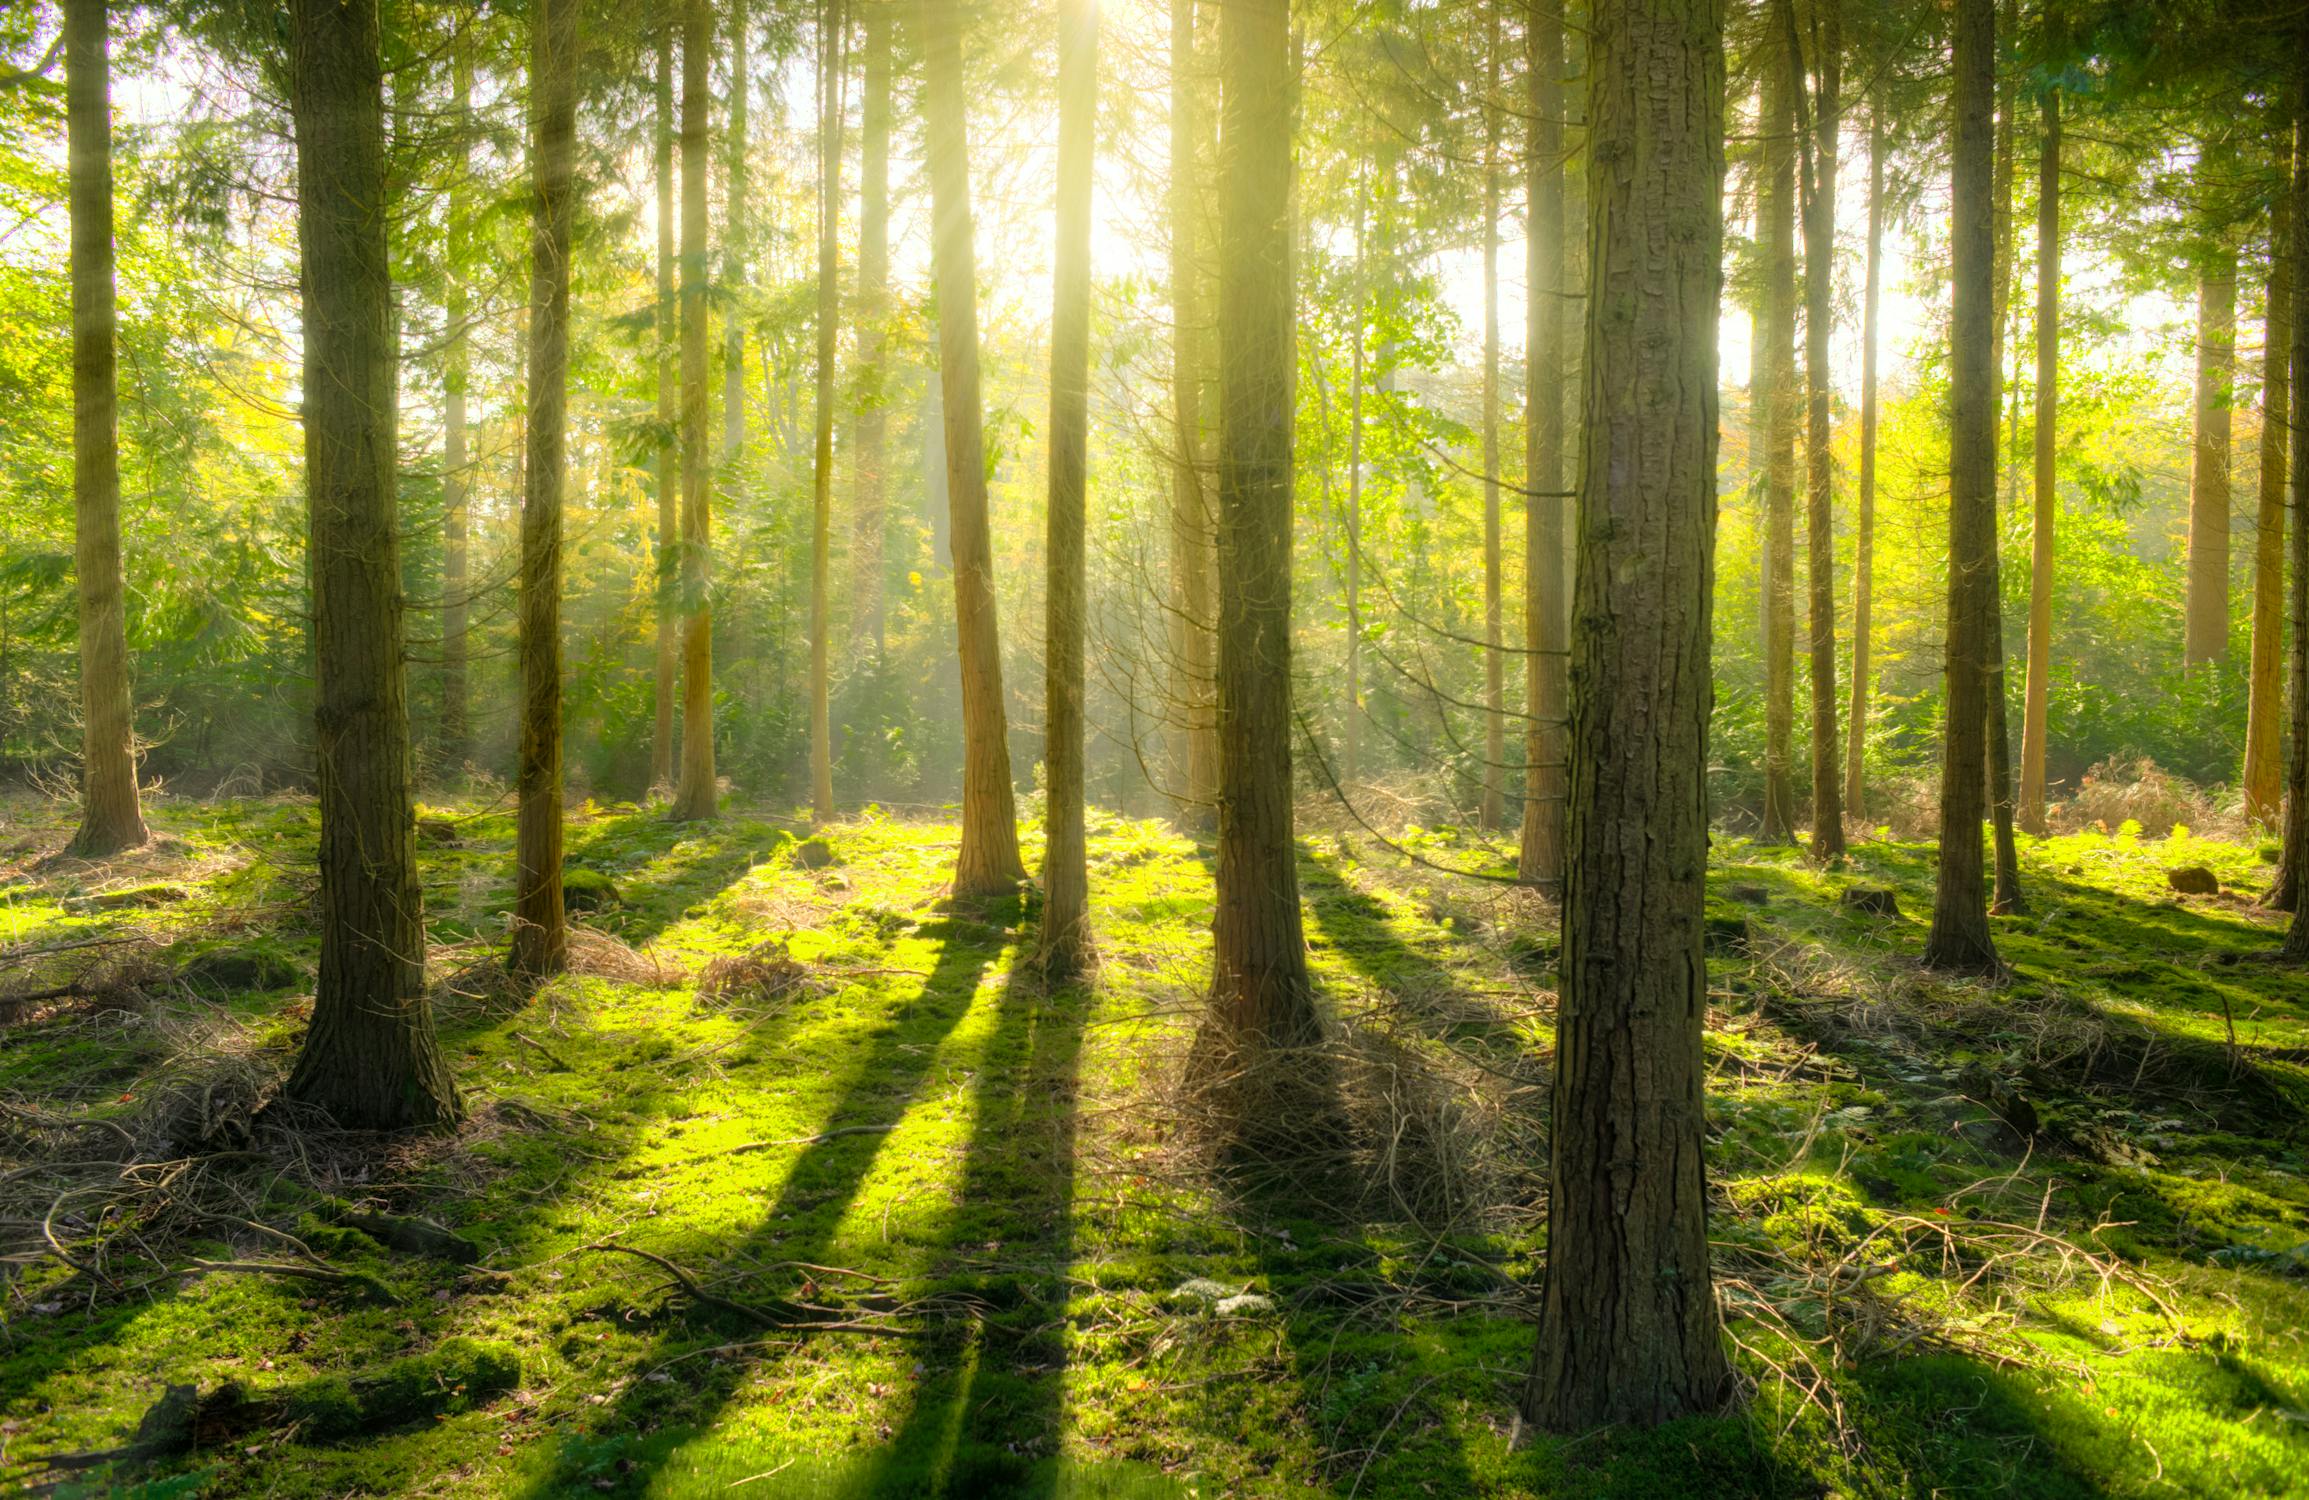 WWF’s Forests Forward Campaign Helps Businesses Meet Sustainability Goals